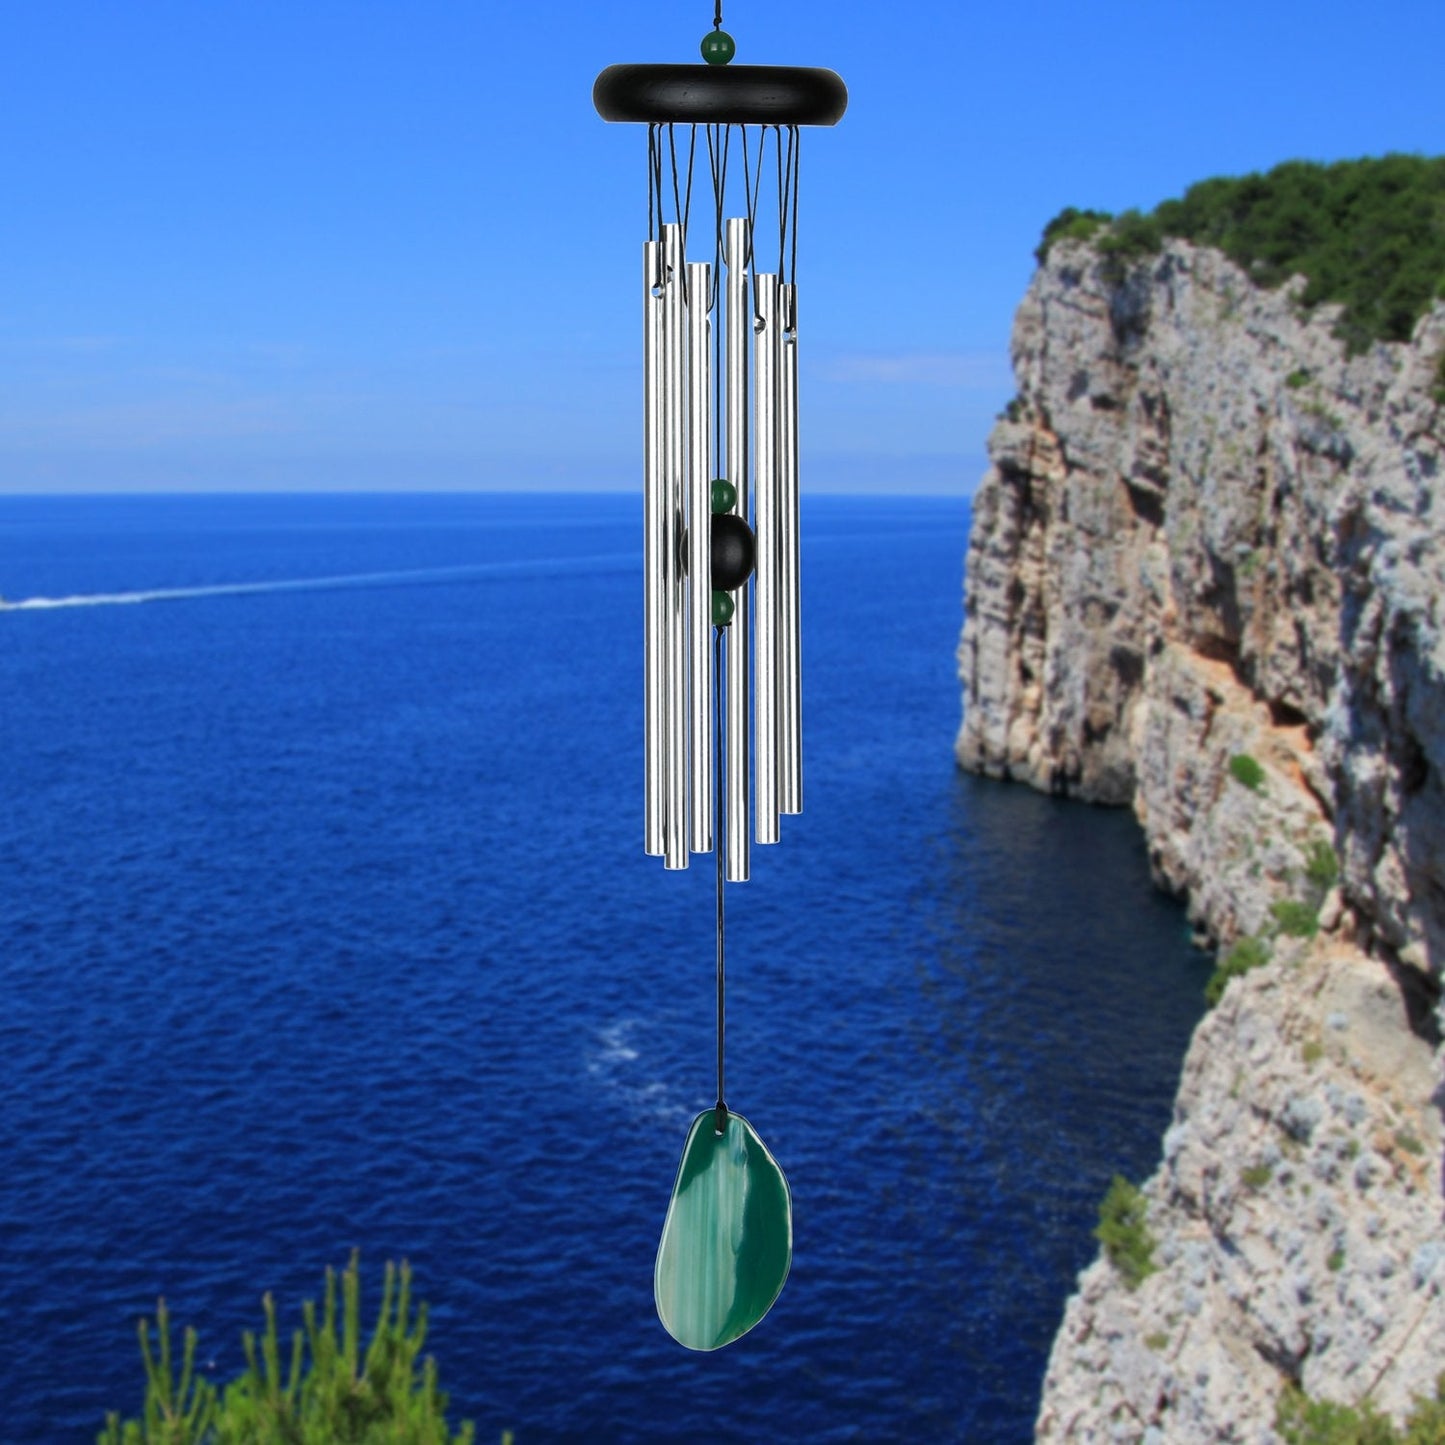 Agate Chime - Small, Green - by Woodstock Chimes